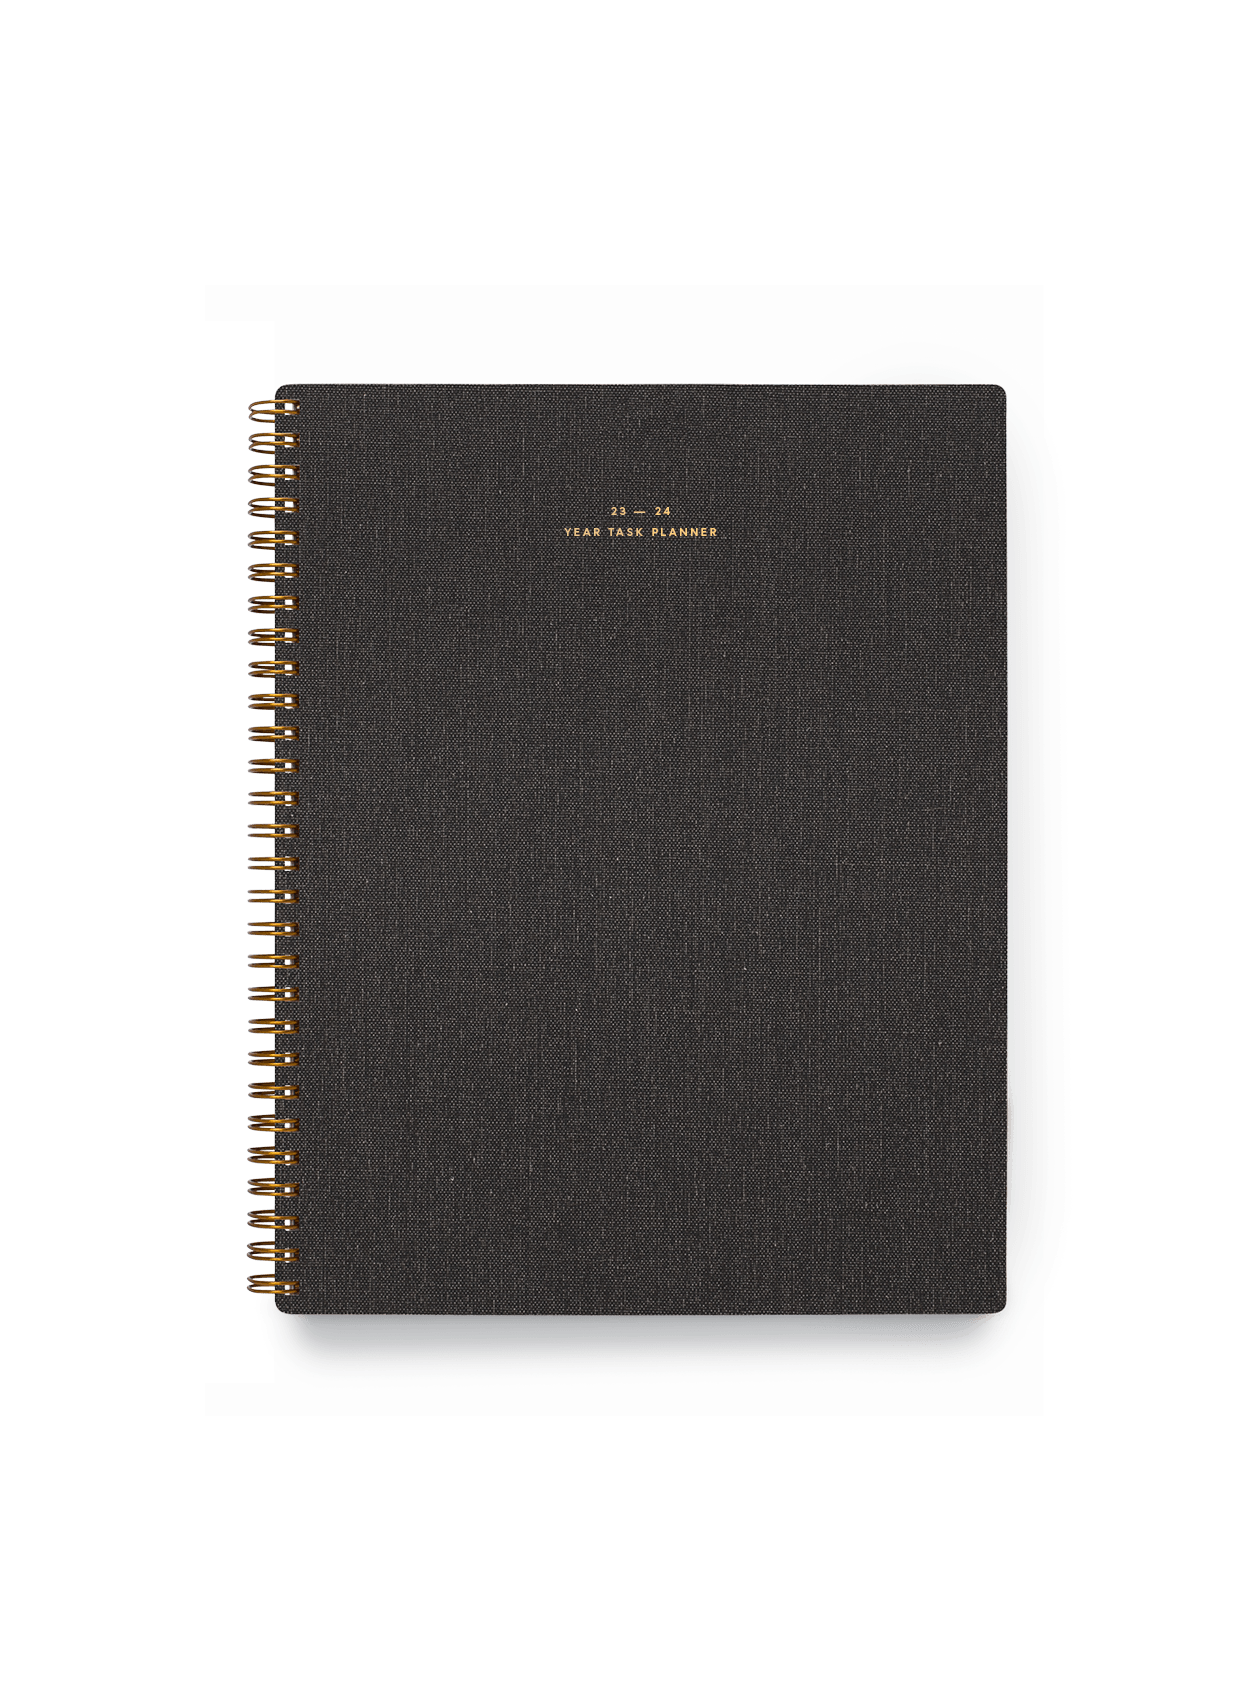 The Appointed 23-34 Year Task Planner in Charcoal Gray with brass wire-o binding, foil details, and textured bookcloth covers || Charcoal Gray